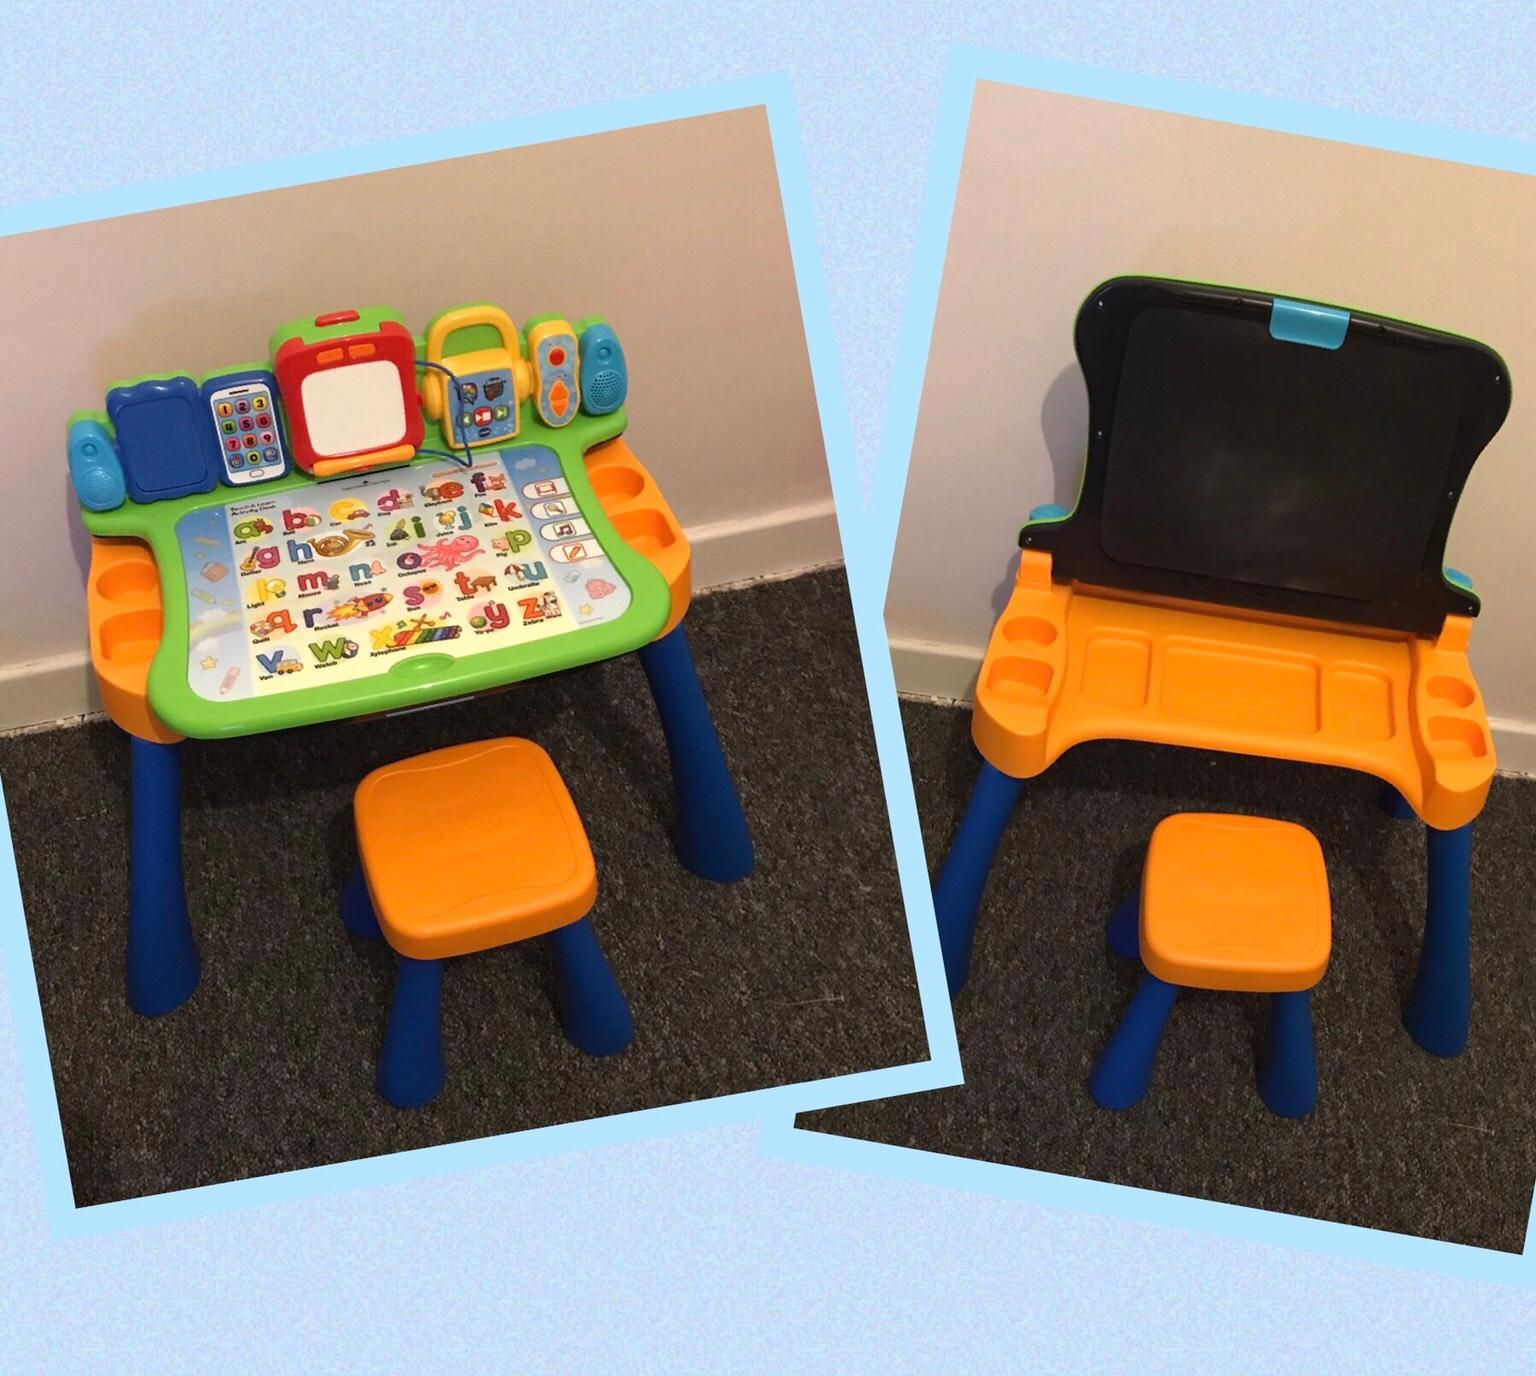 touch and go activity desk